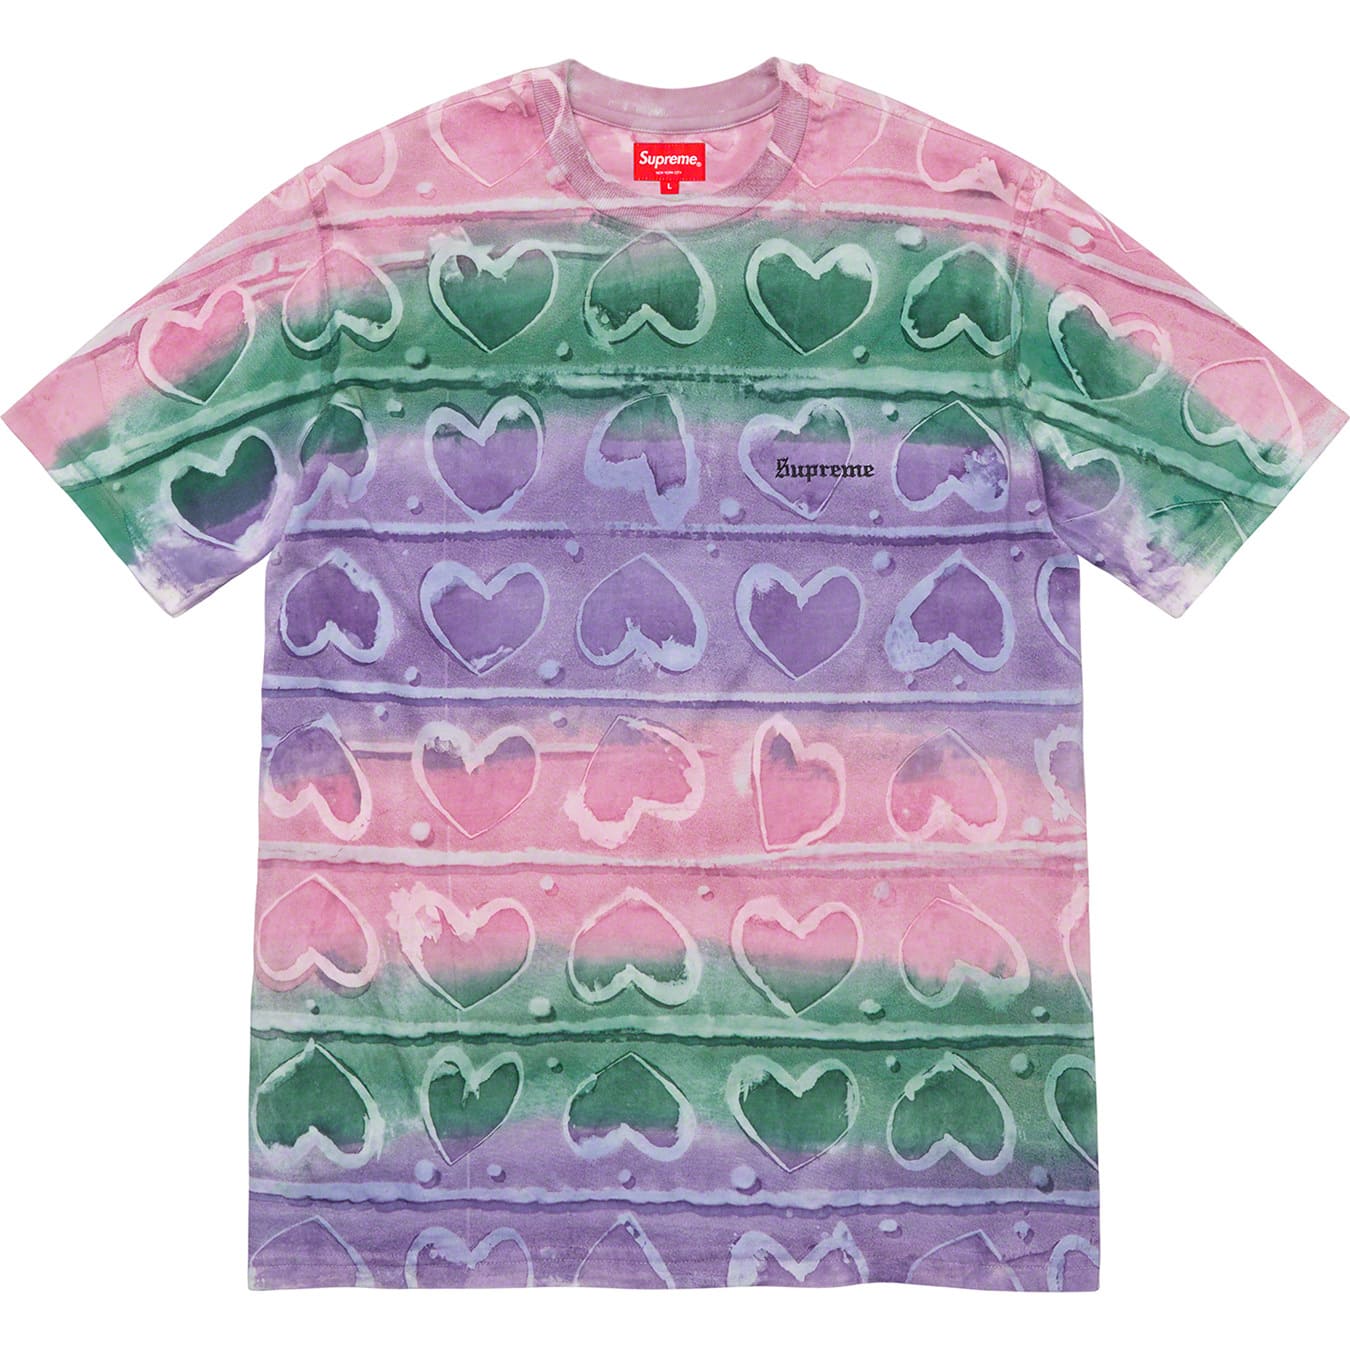 Supreme Hearts Dyed S/S Top